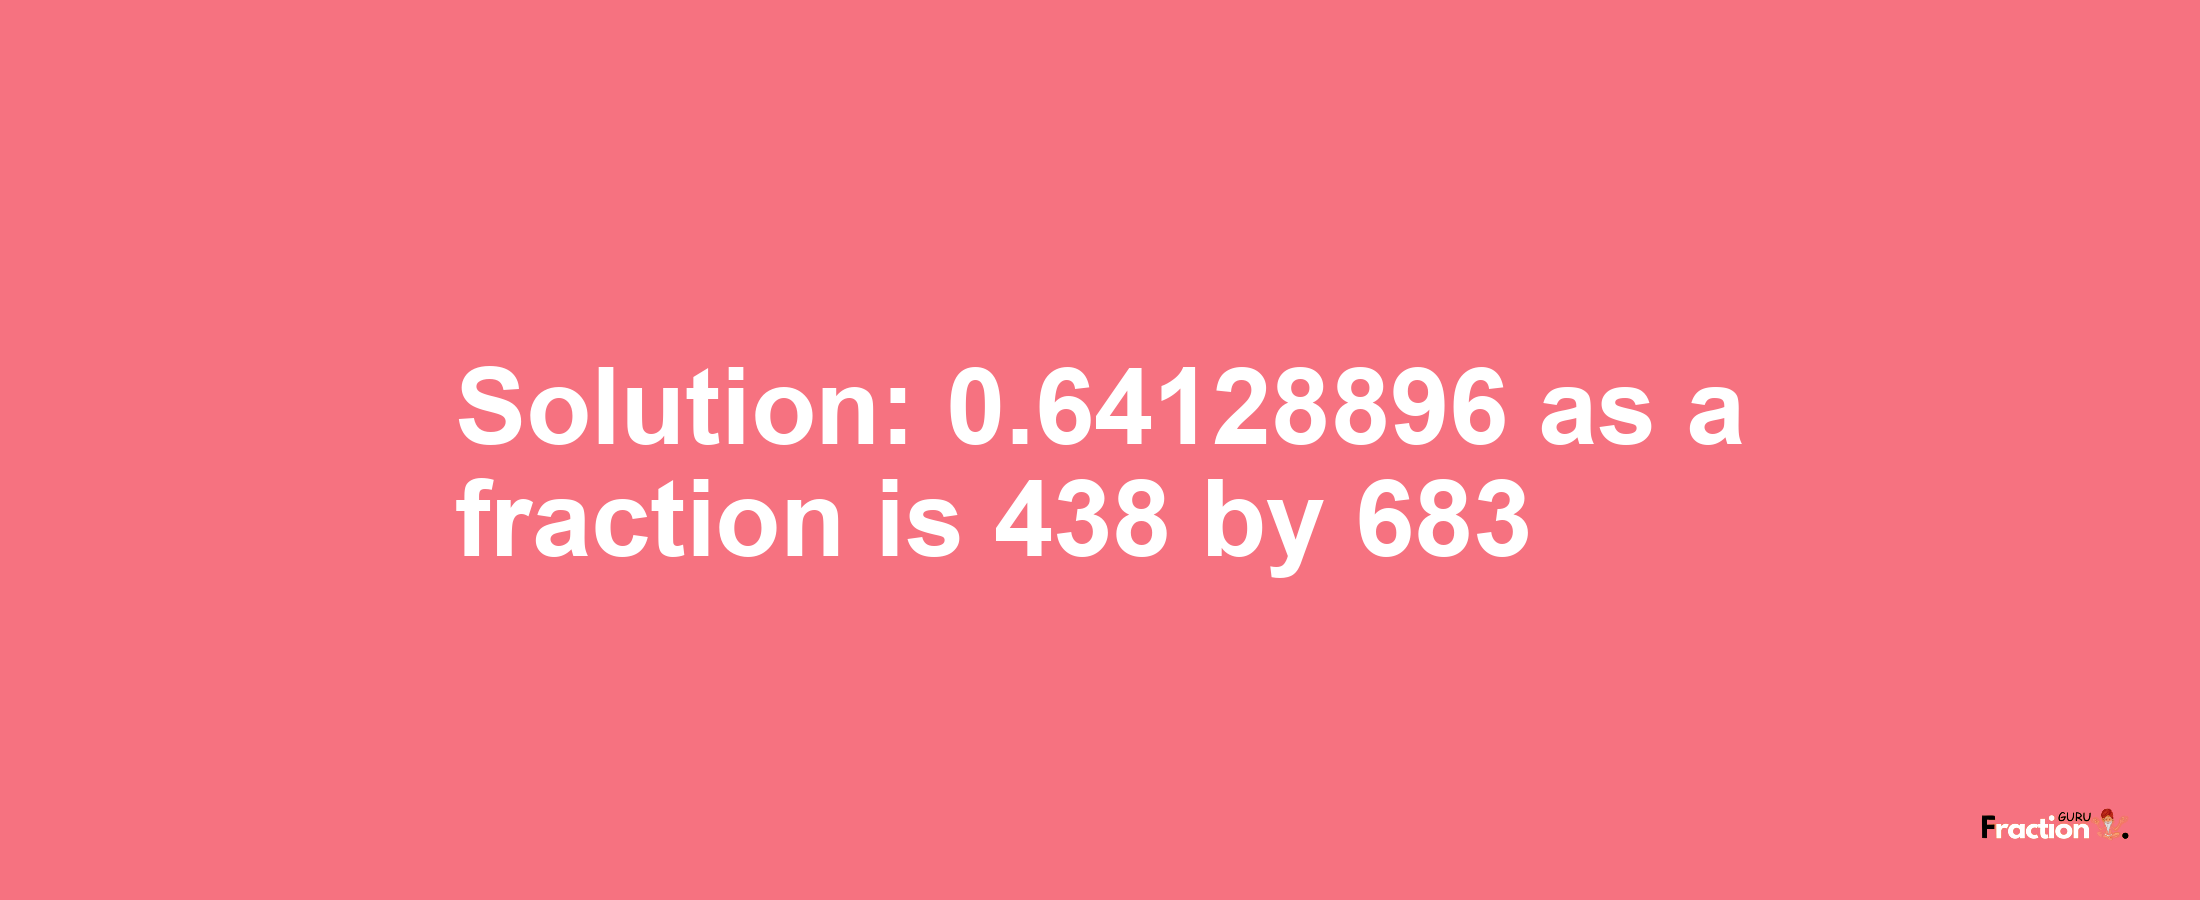 Solution:0.64128896 as a fraction is 438/683